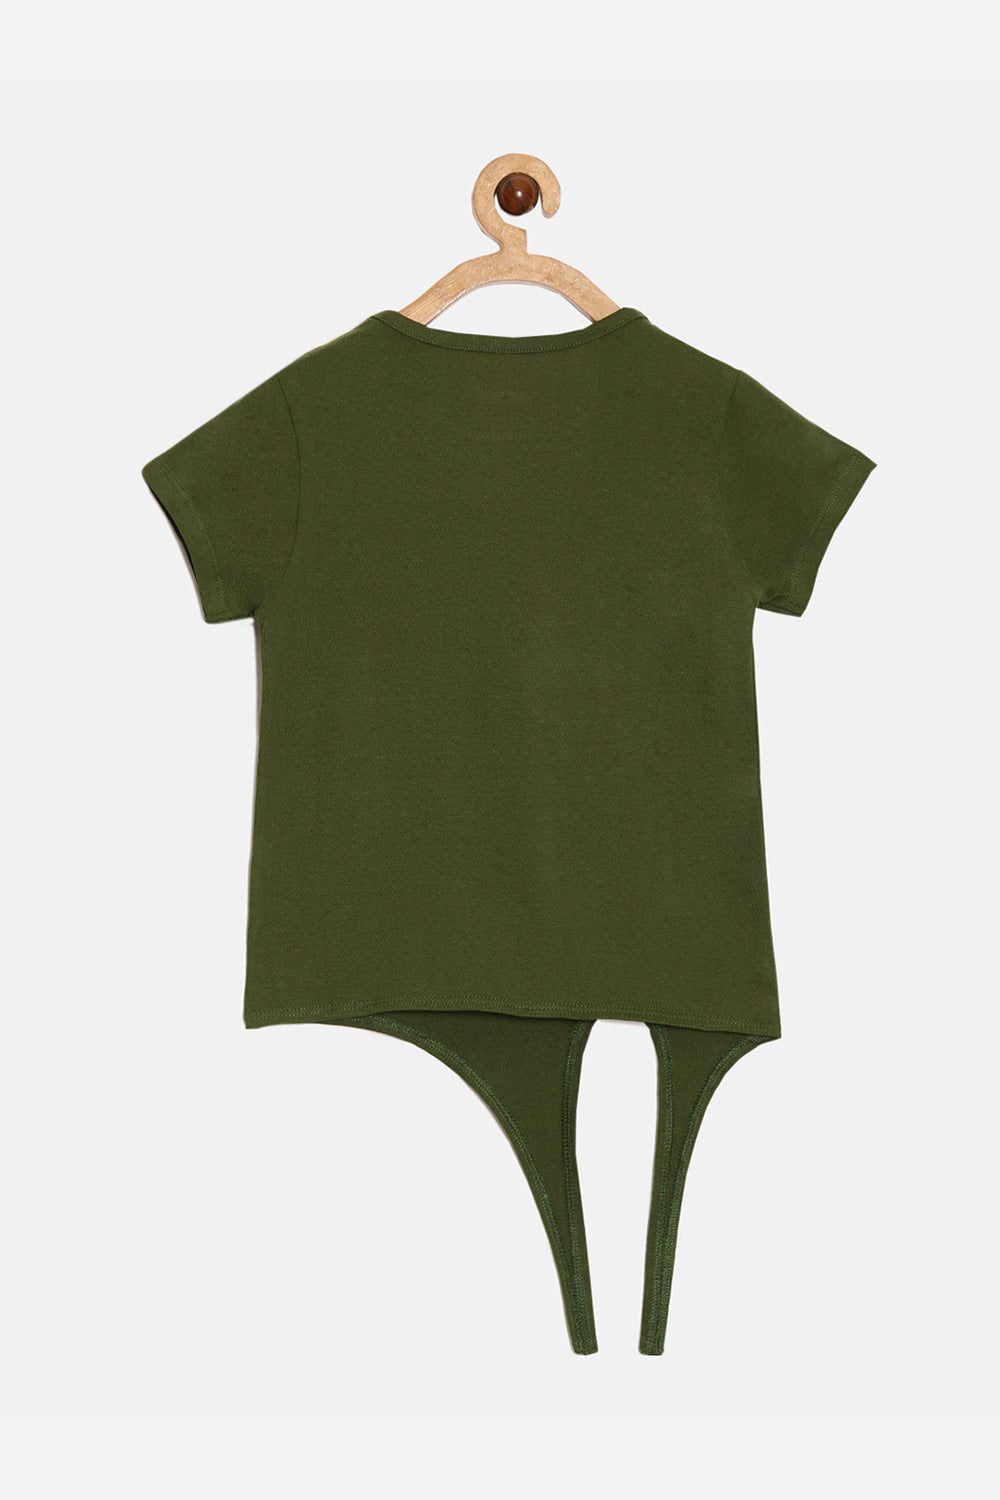 The Young Future Girls Cotton T-shirt - Olive Green - SG14